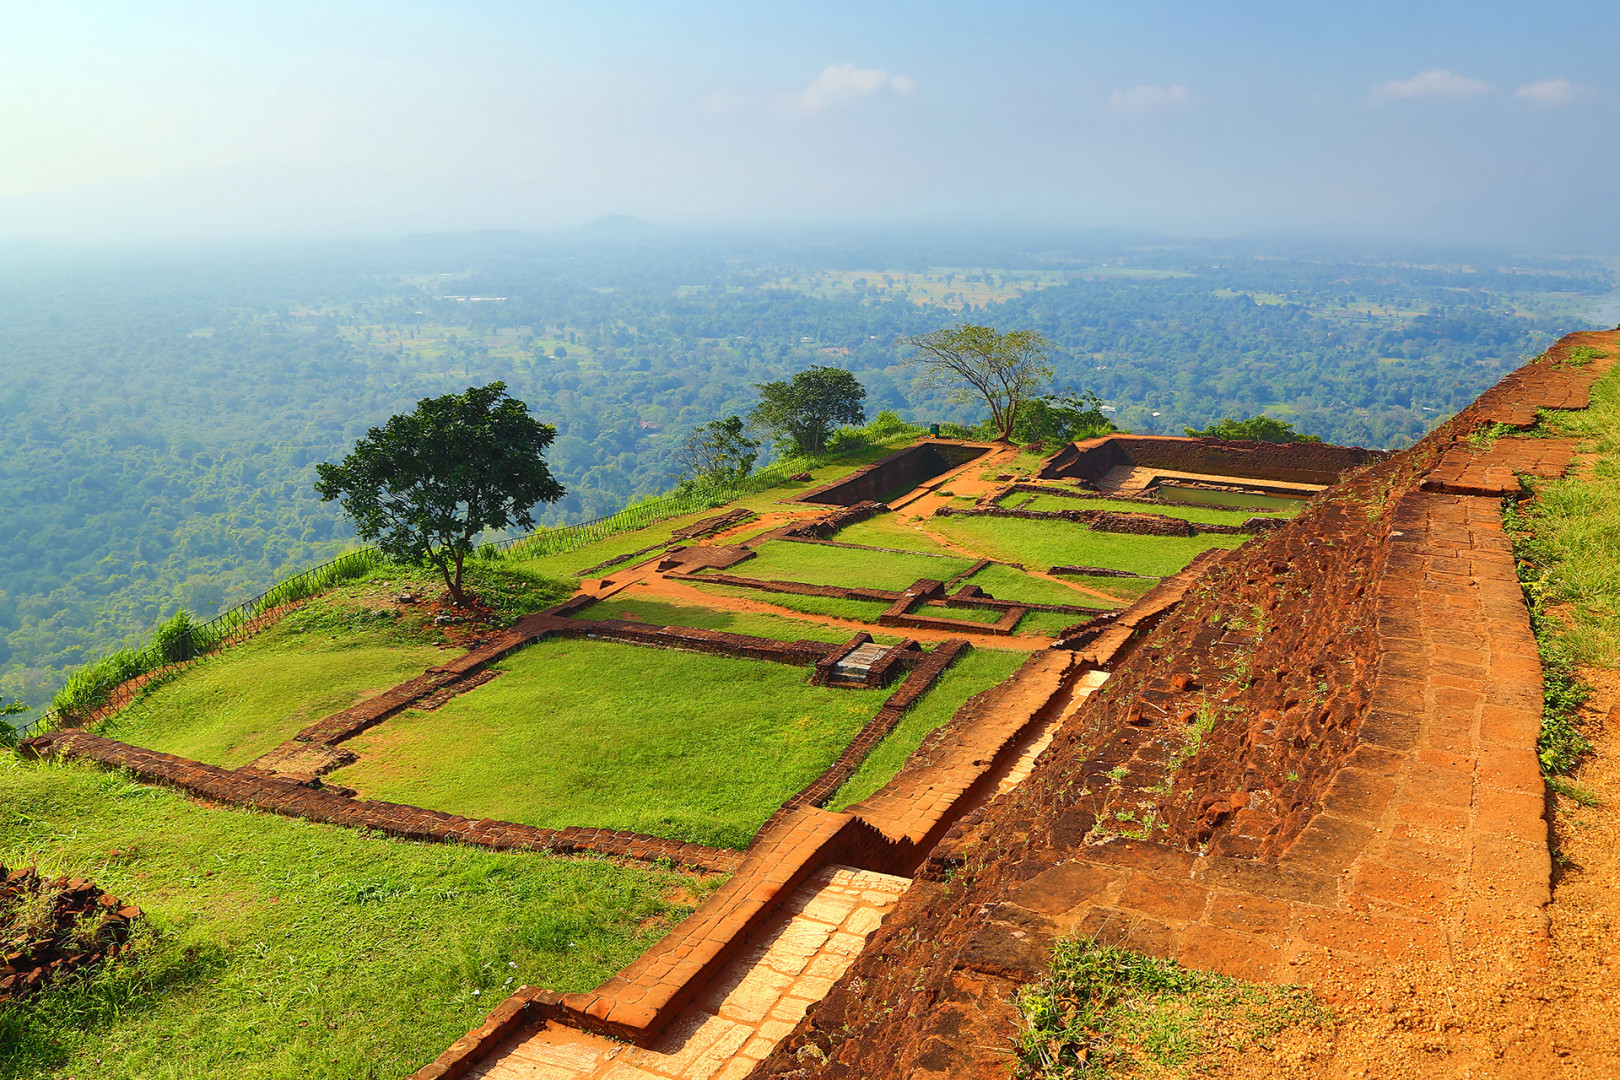 Tourist Attraction in Sri Lanka 1. Asian Ancient City of a Thousand Years: Ancient City of Sigiriya